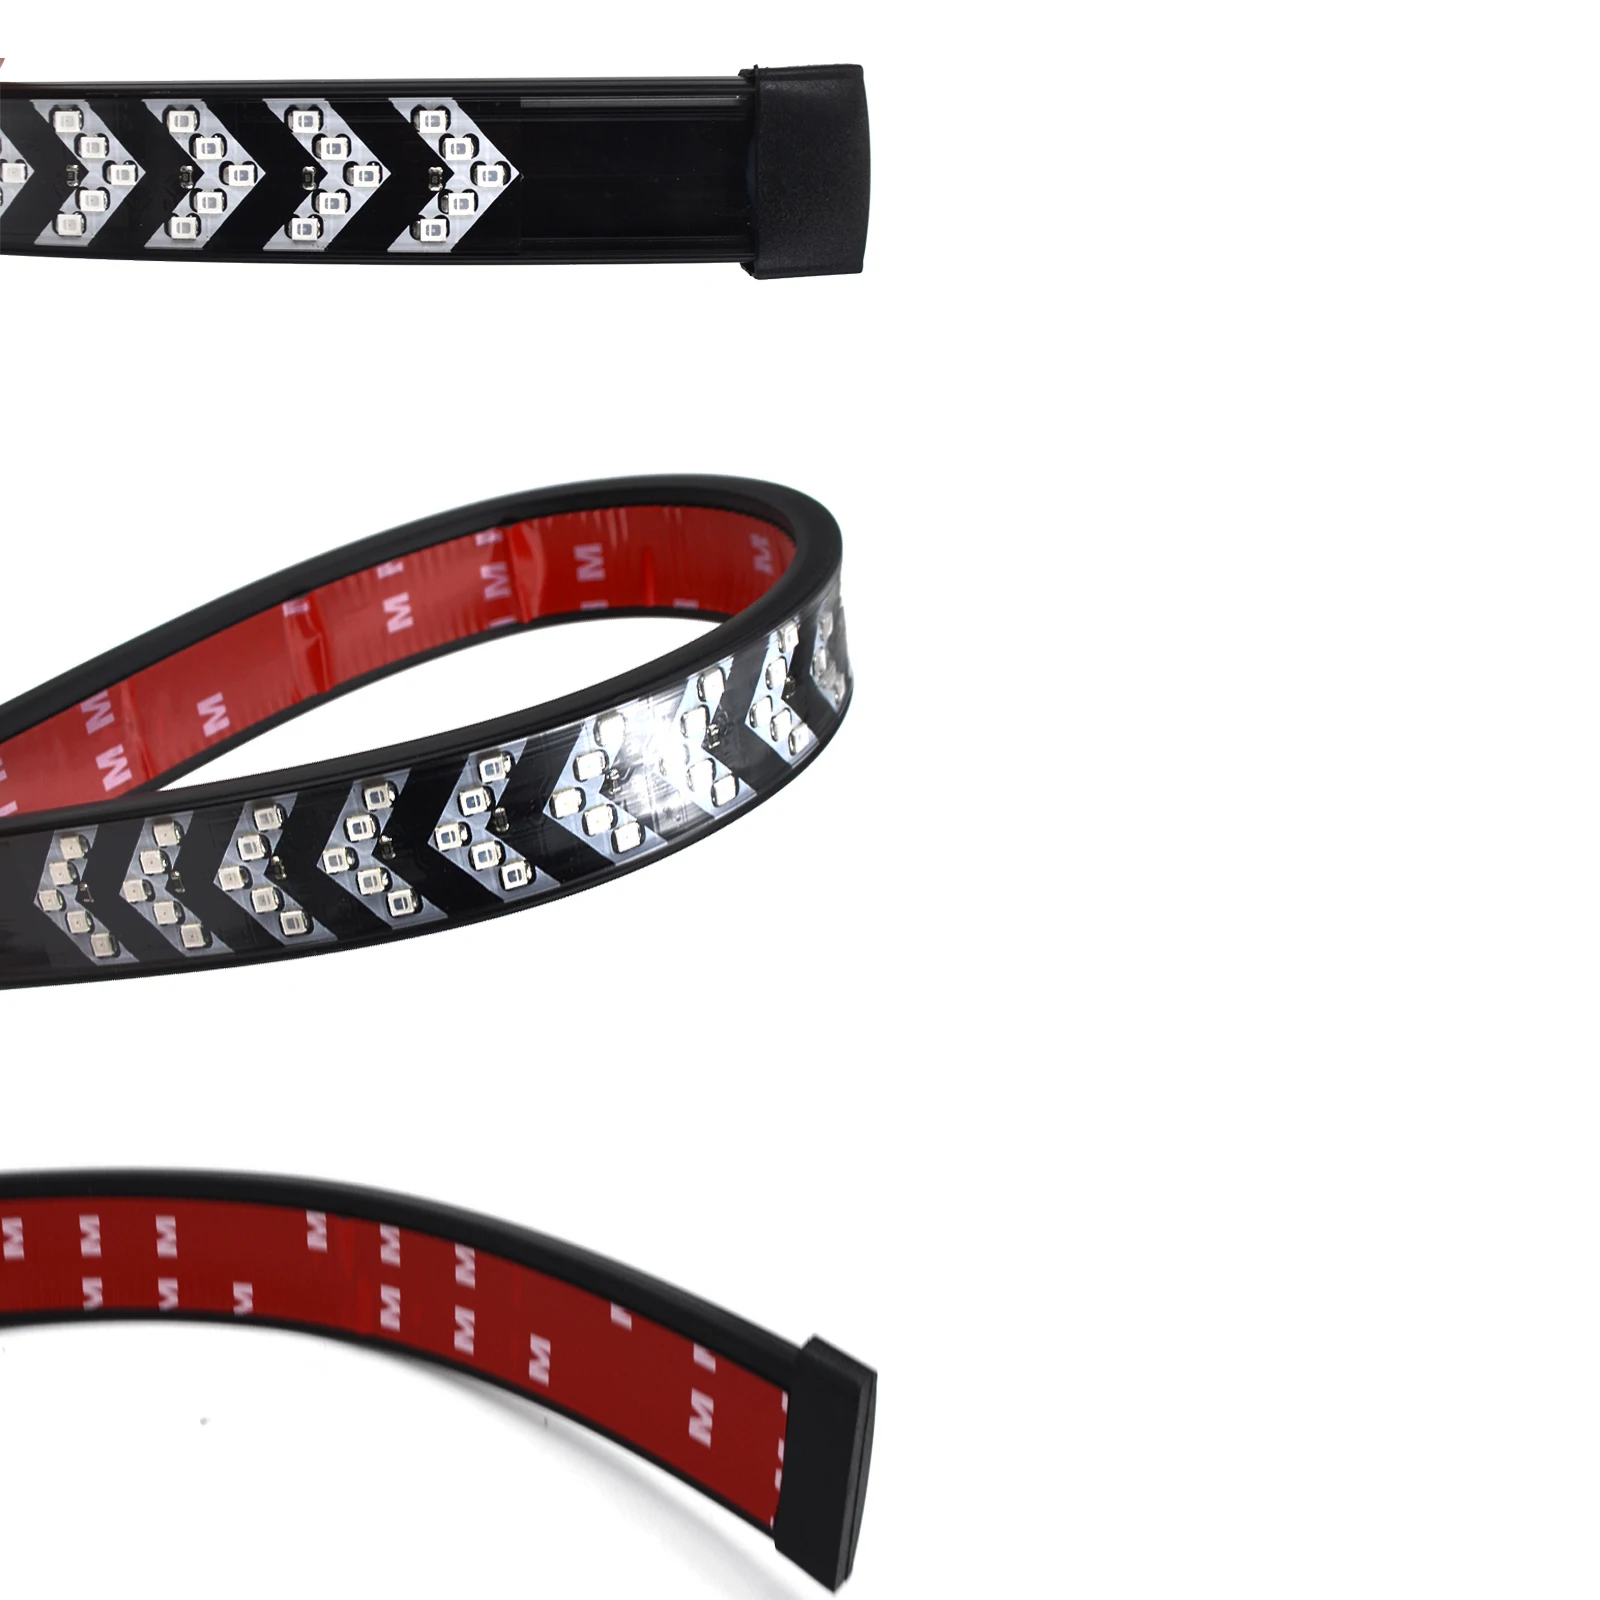 New arrival cheap high durability waterproof led stop/tail/turn light strip for truck scanning tail led